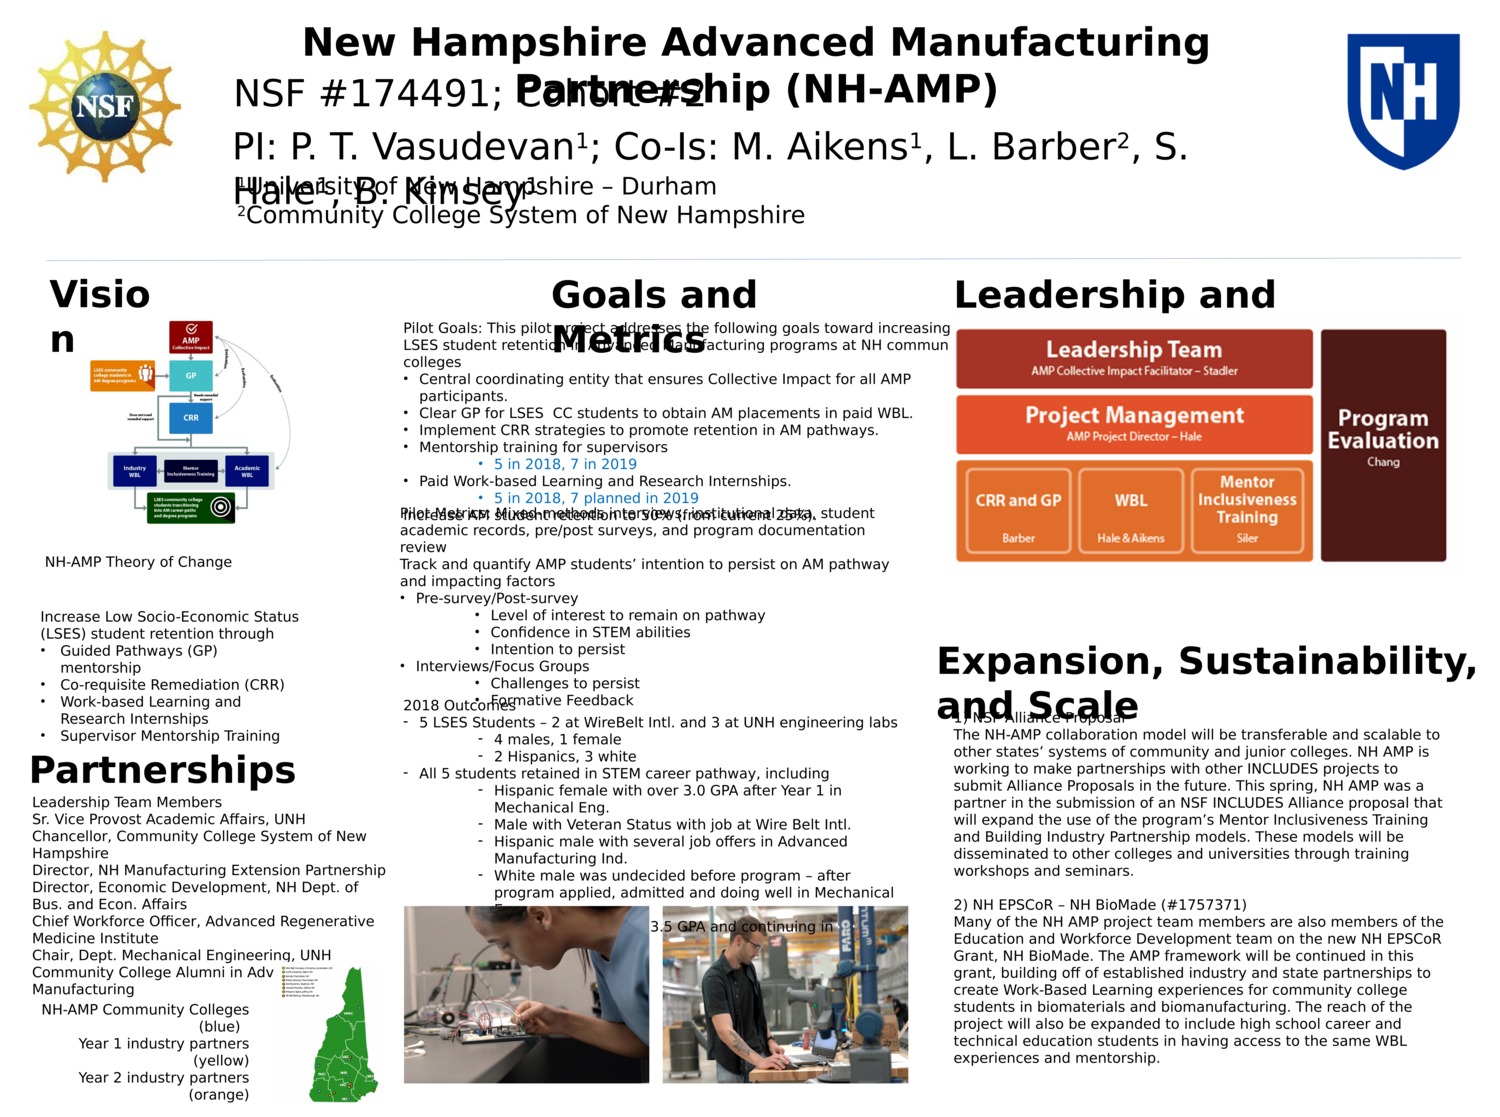 New Hampshire Advanced Manufacturing Partnership  by srhale